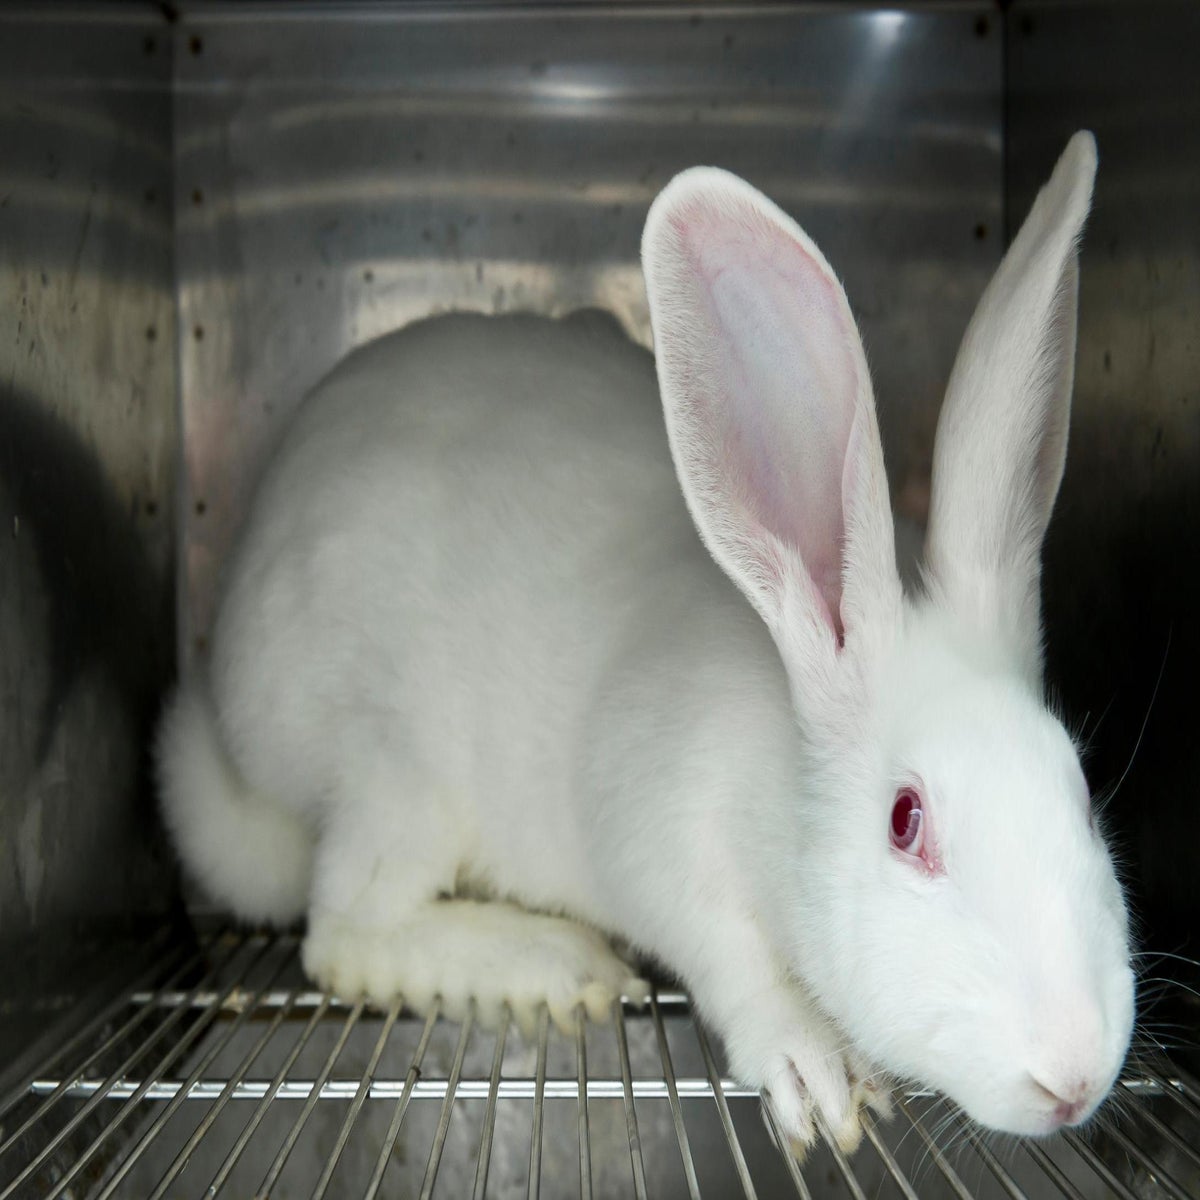 Rabbits given cholera and fatal injections in 'painful' university  experiments | The Independent | The Independent